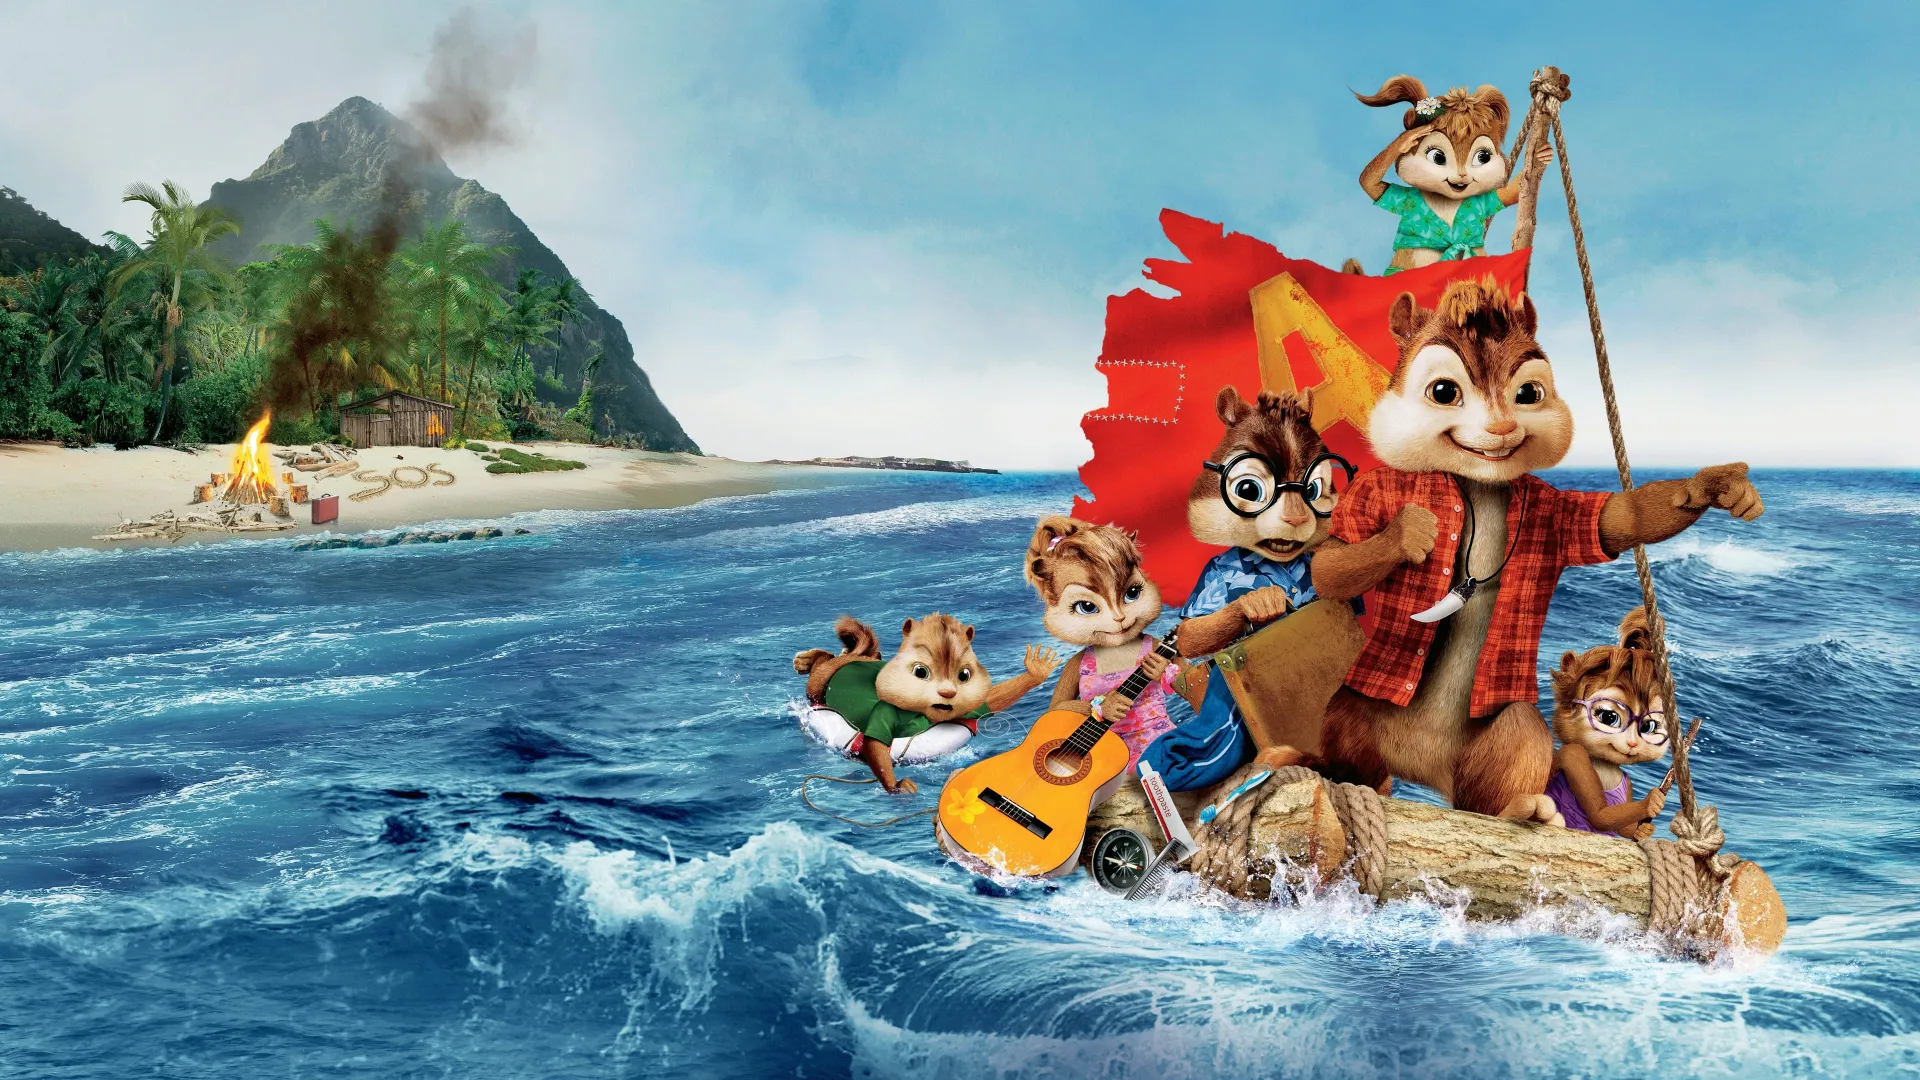 Alvin and the Chipmunks 3: Chipwrecked